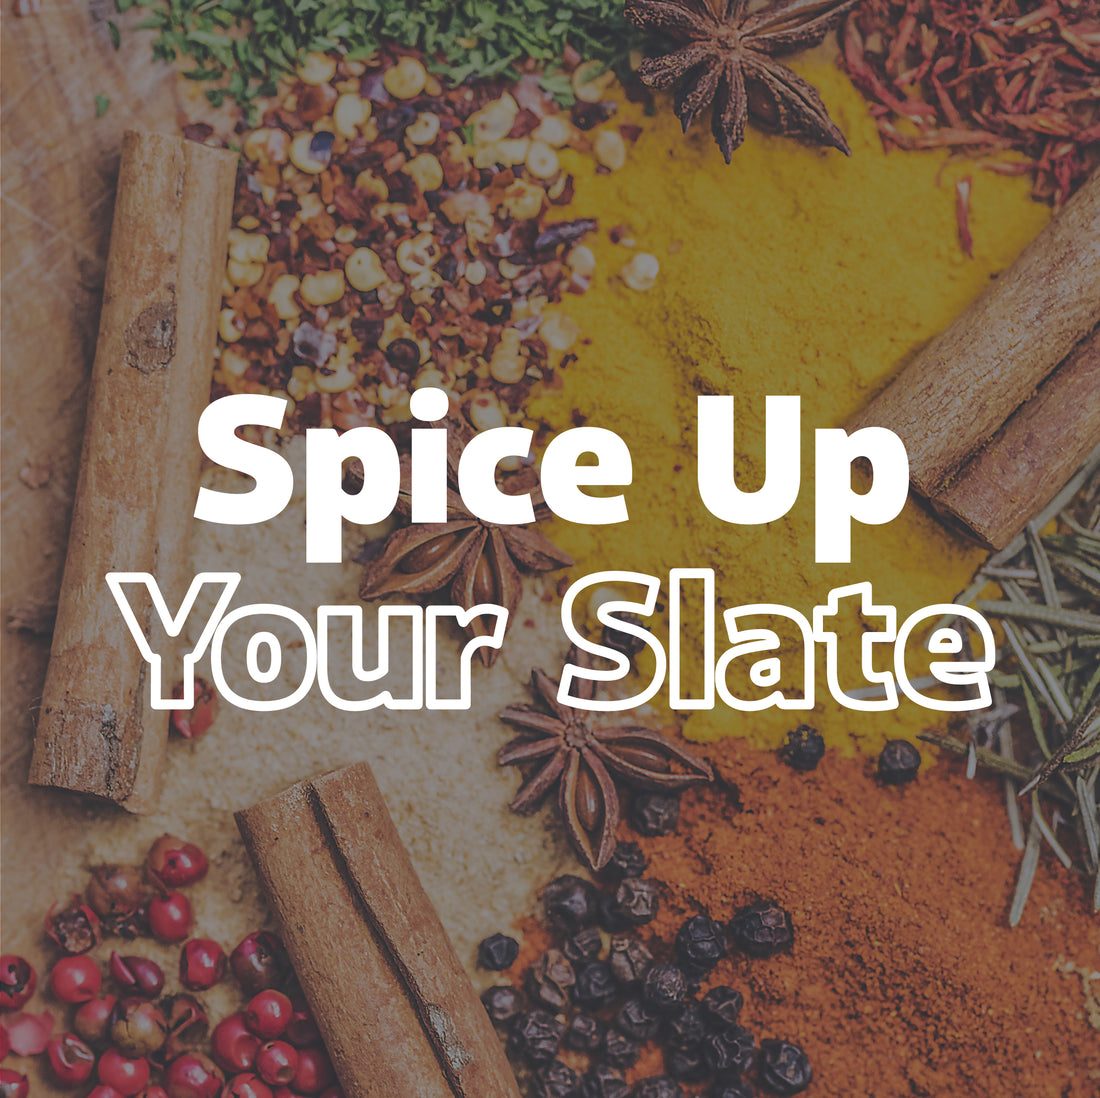  Spice Up Your Slate